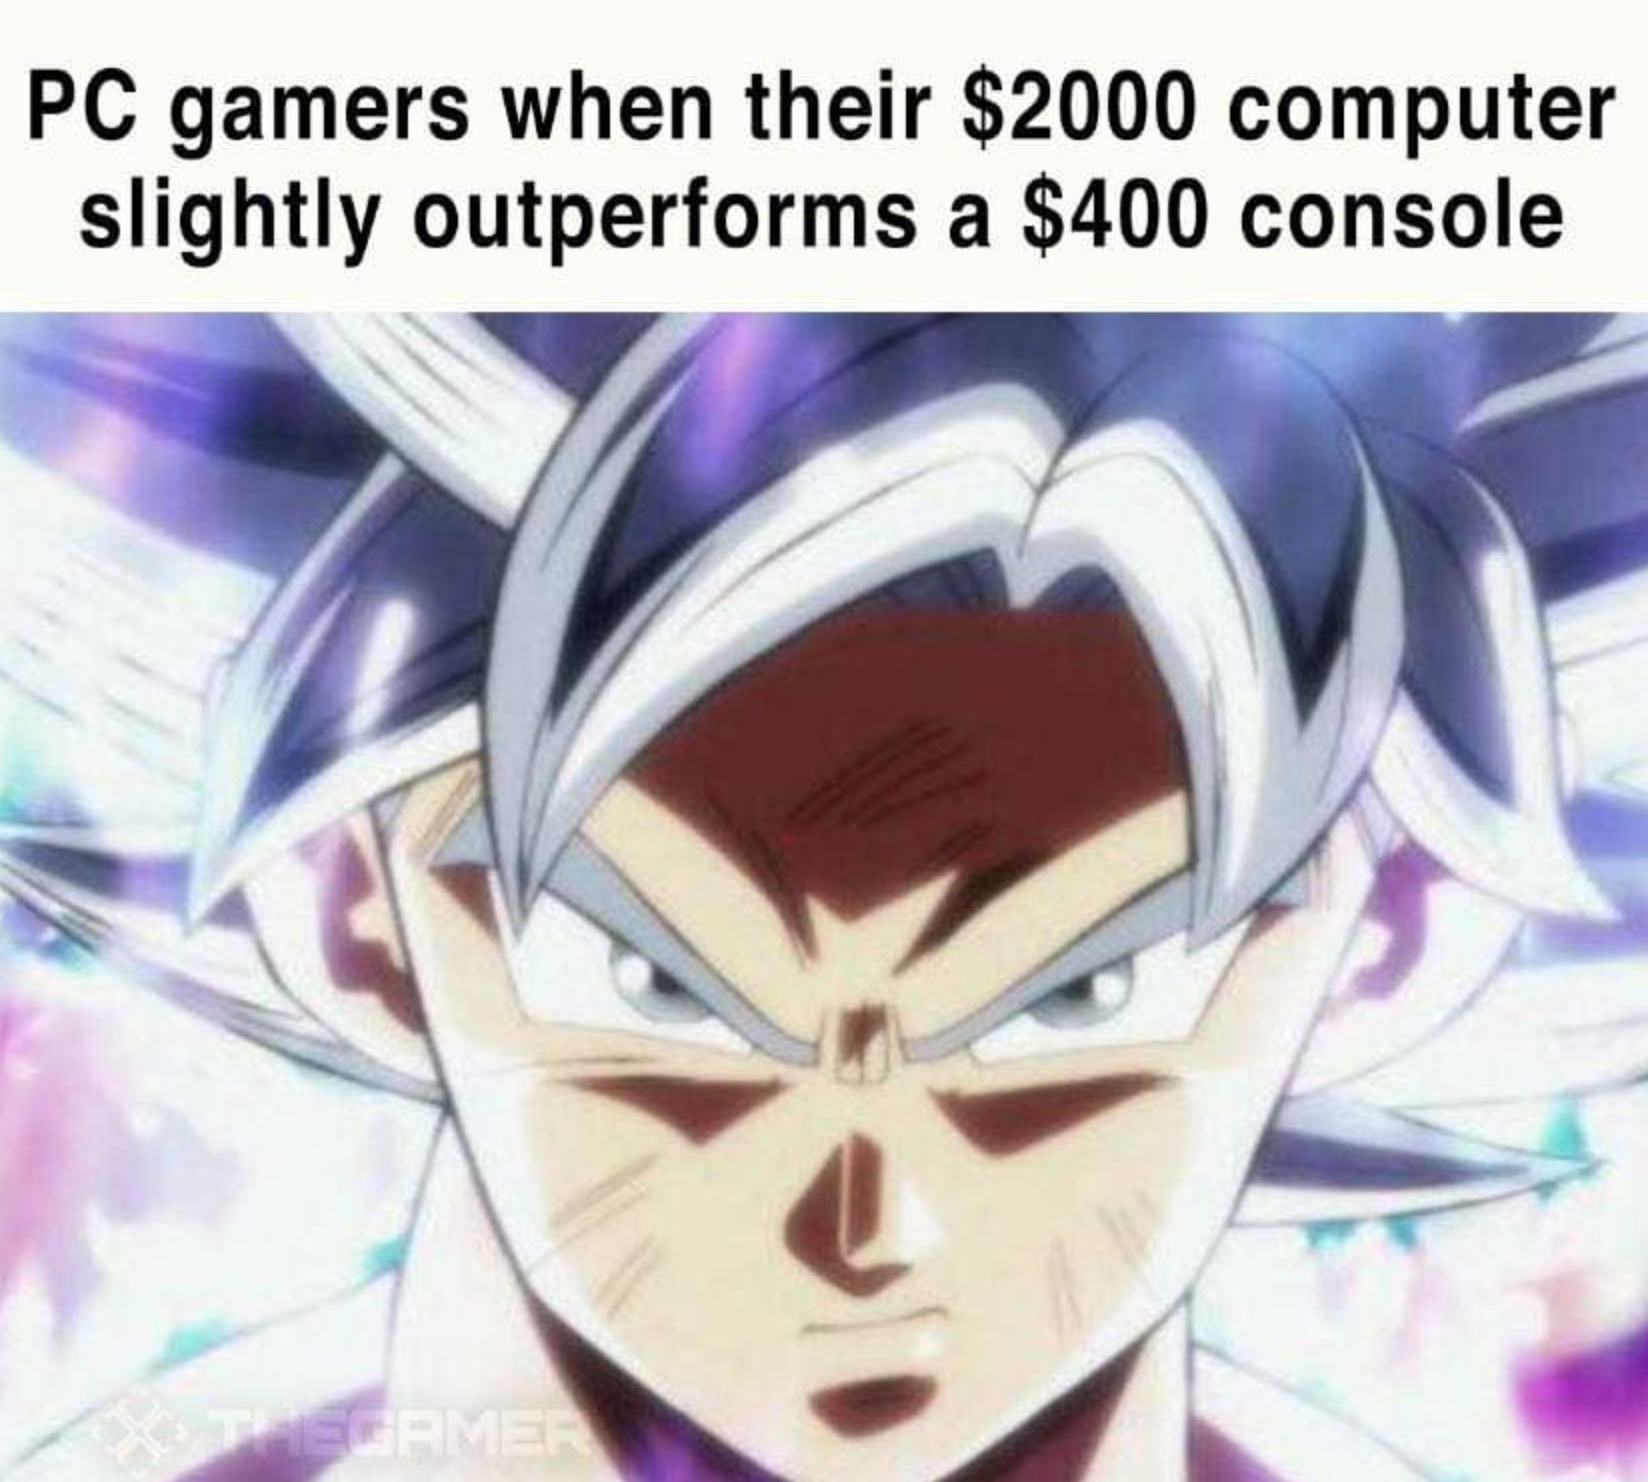 gaming memes - dragon ball z goku ultra instinct - Pc gamers when their $2000 computer slightly outperforms a $400 console Permer